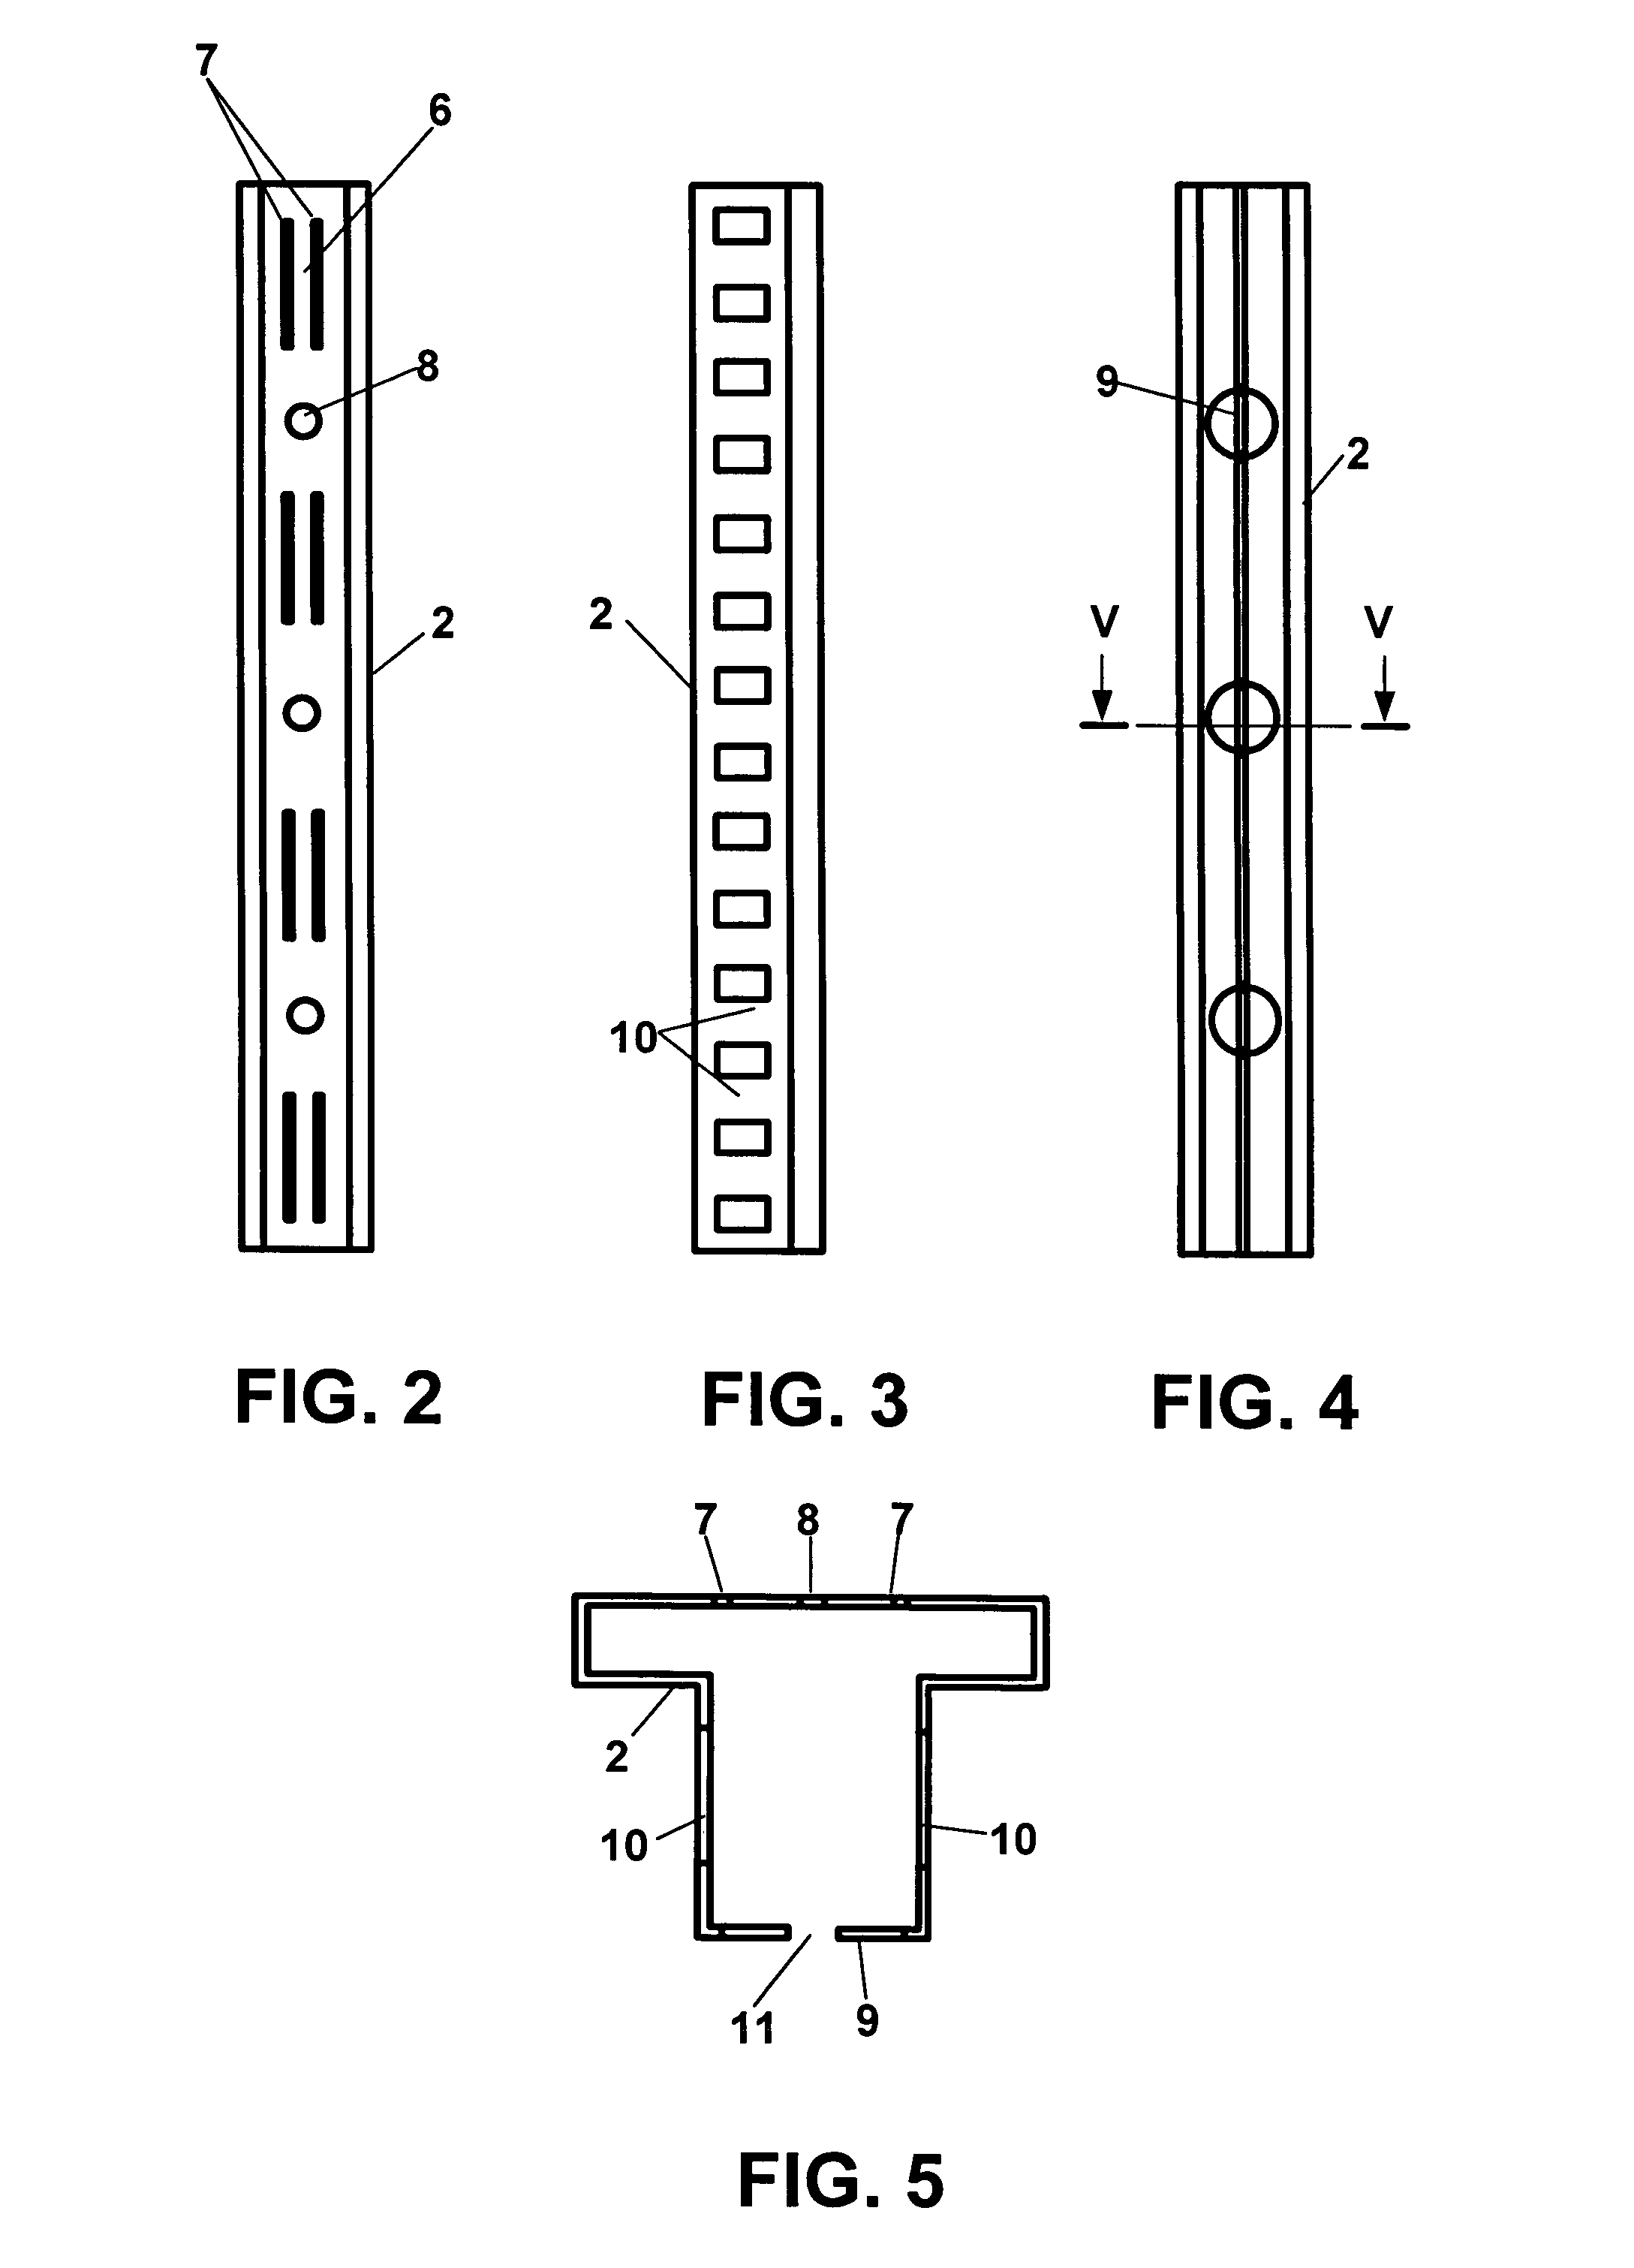 Shelf system for storage and filing of objects